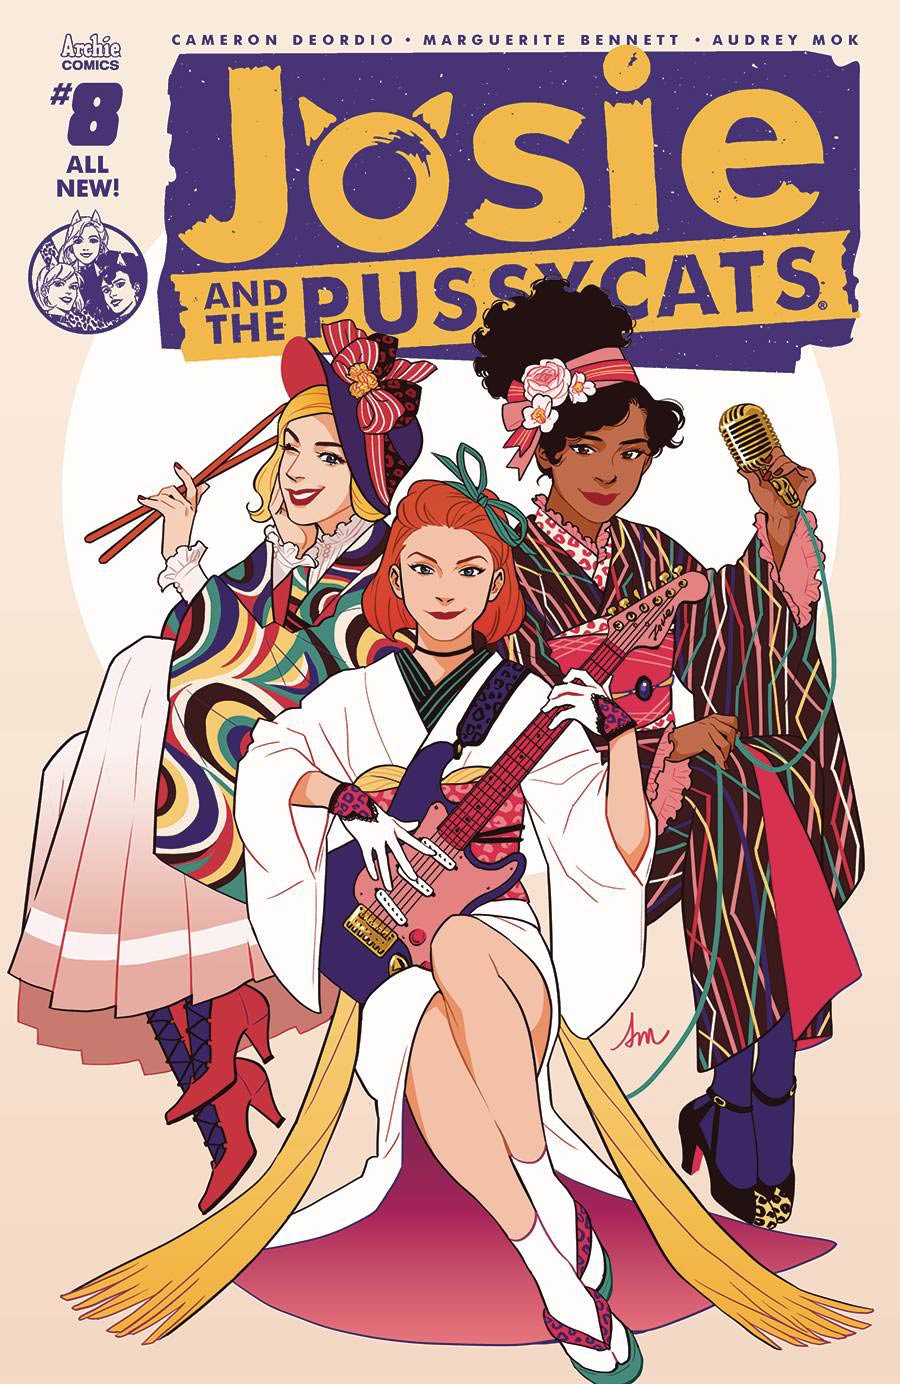 Josie And The Pussycats Vol 2 #8 Cover A Regular Audrey Mok Cover